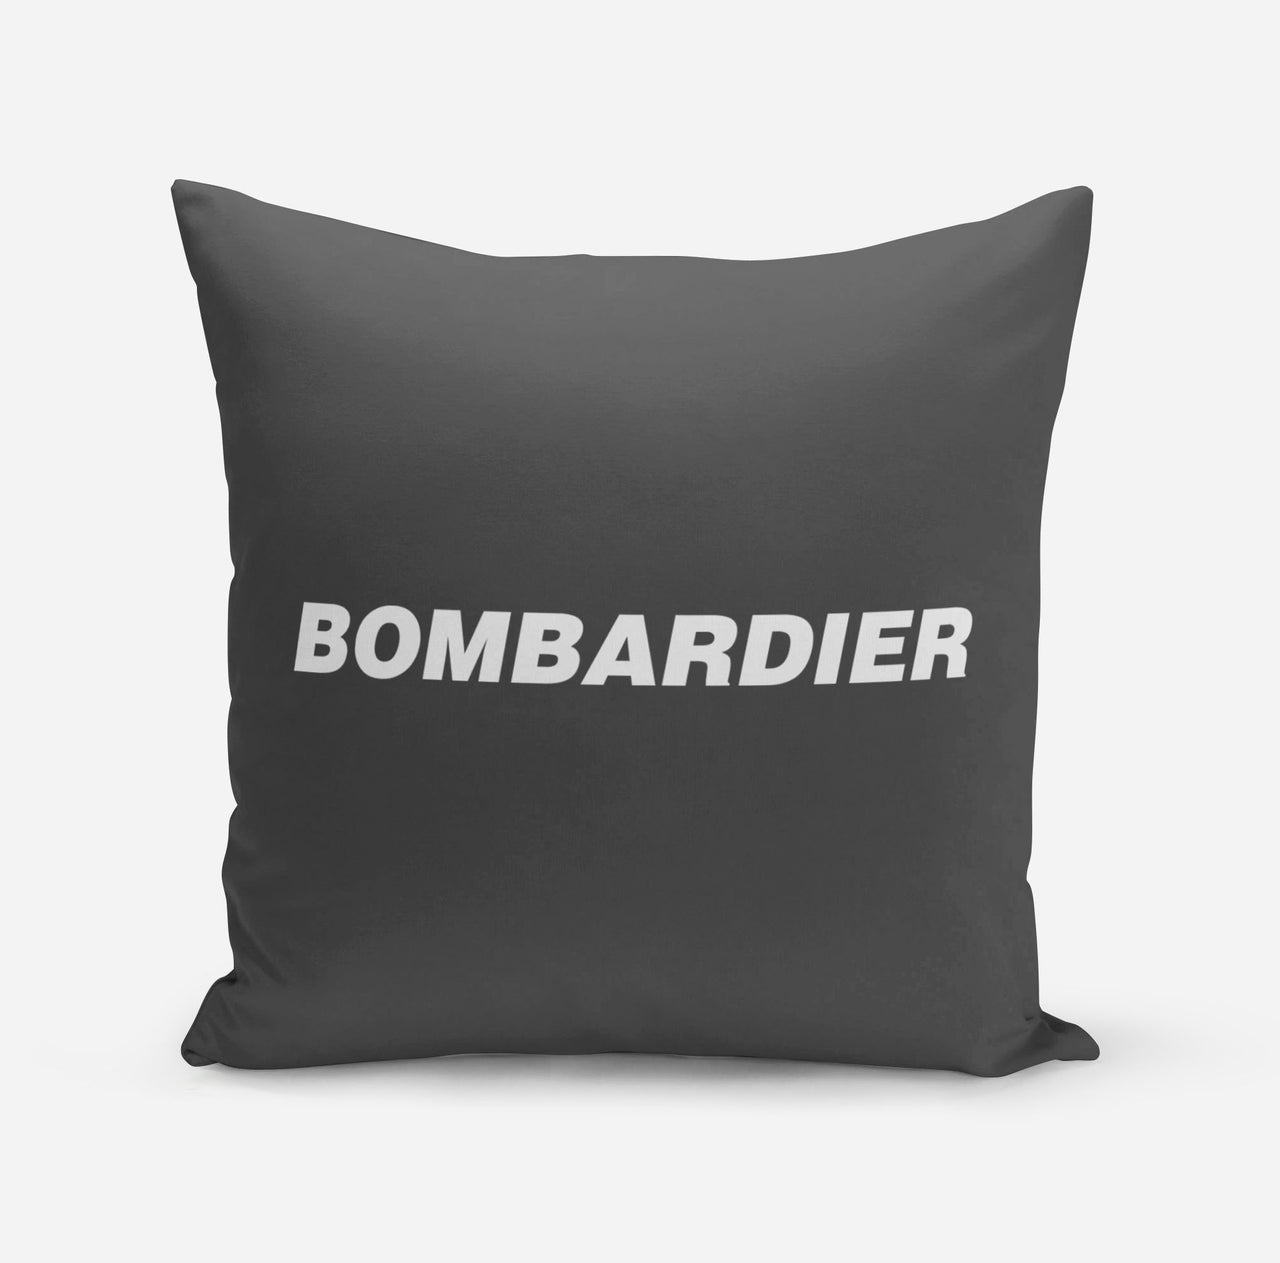 Bombardier & Text Designed Pillows